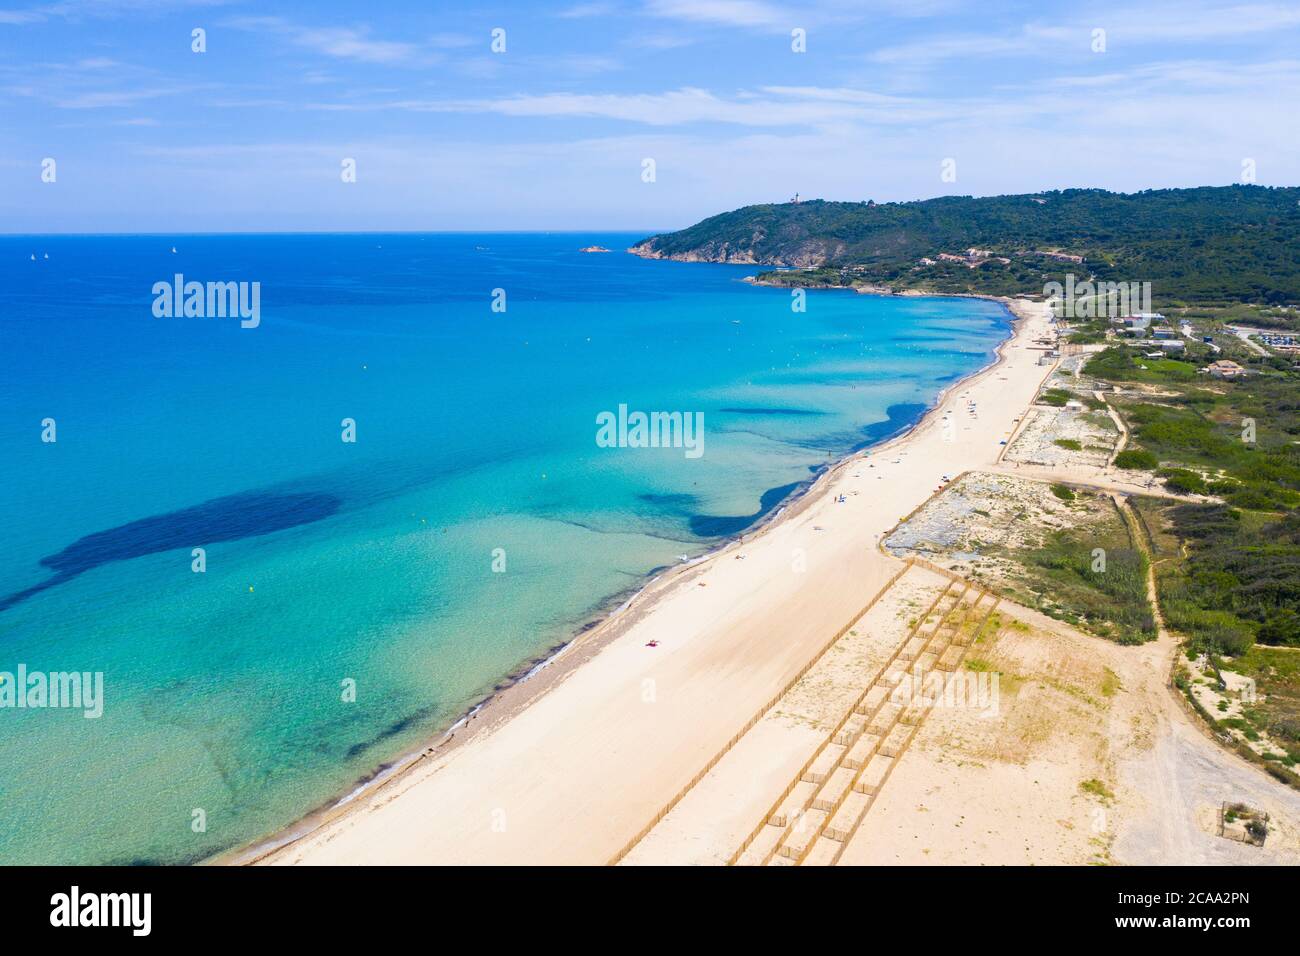 Var department, Ramatuelle - Saint Tropez, Aerial view of Pampelonne beach, the famous beach located on French Riviera Stock Photo